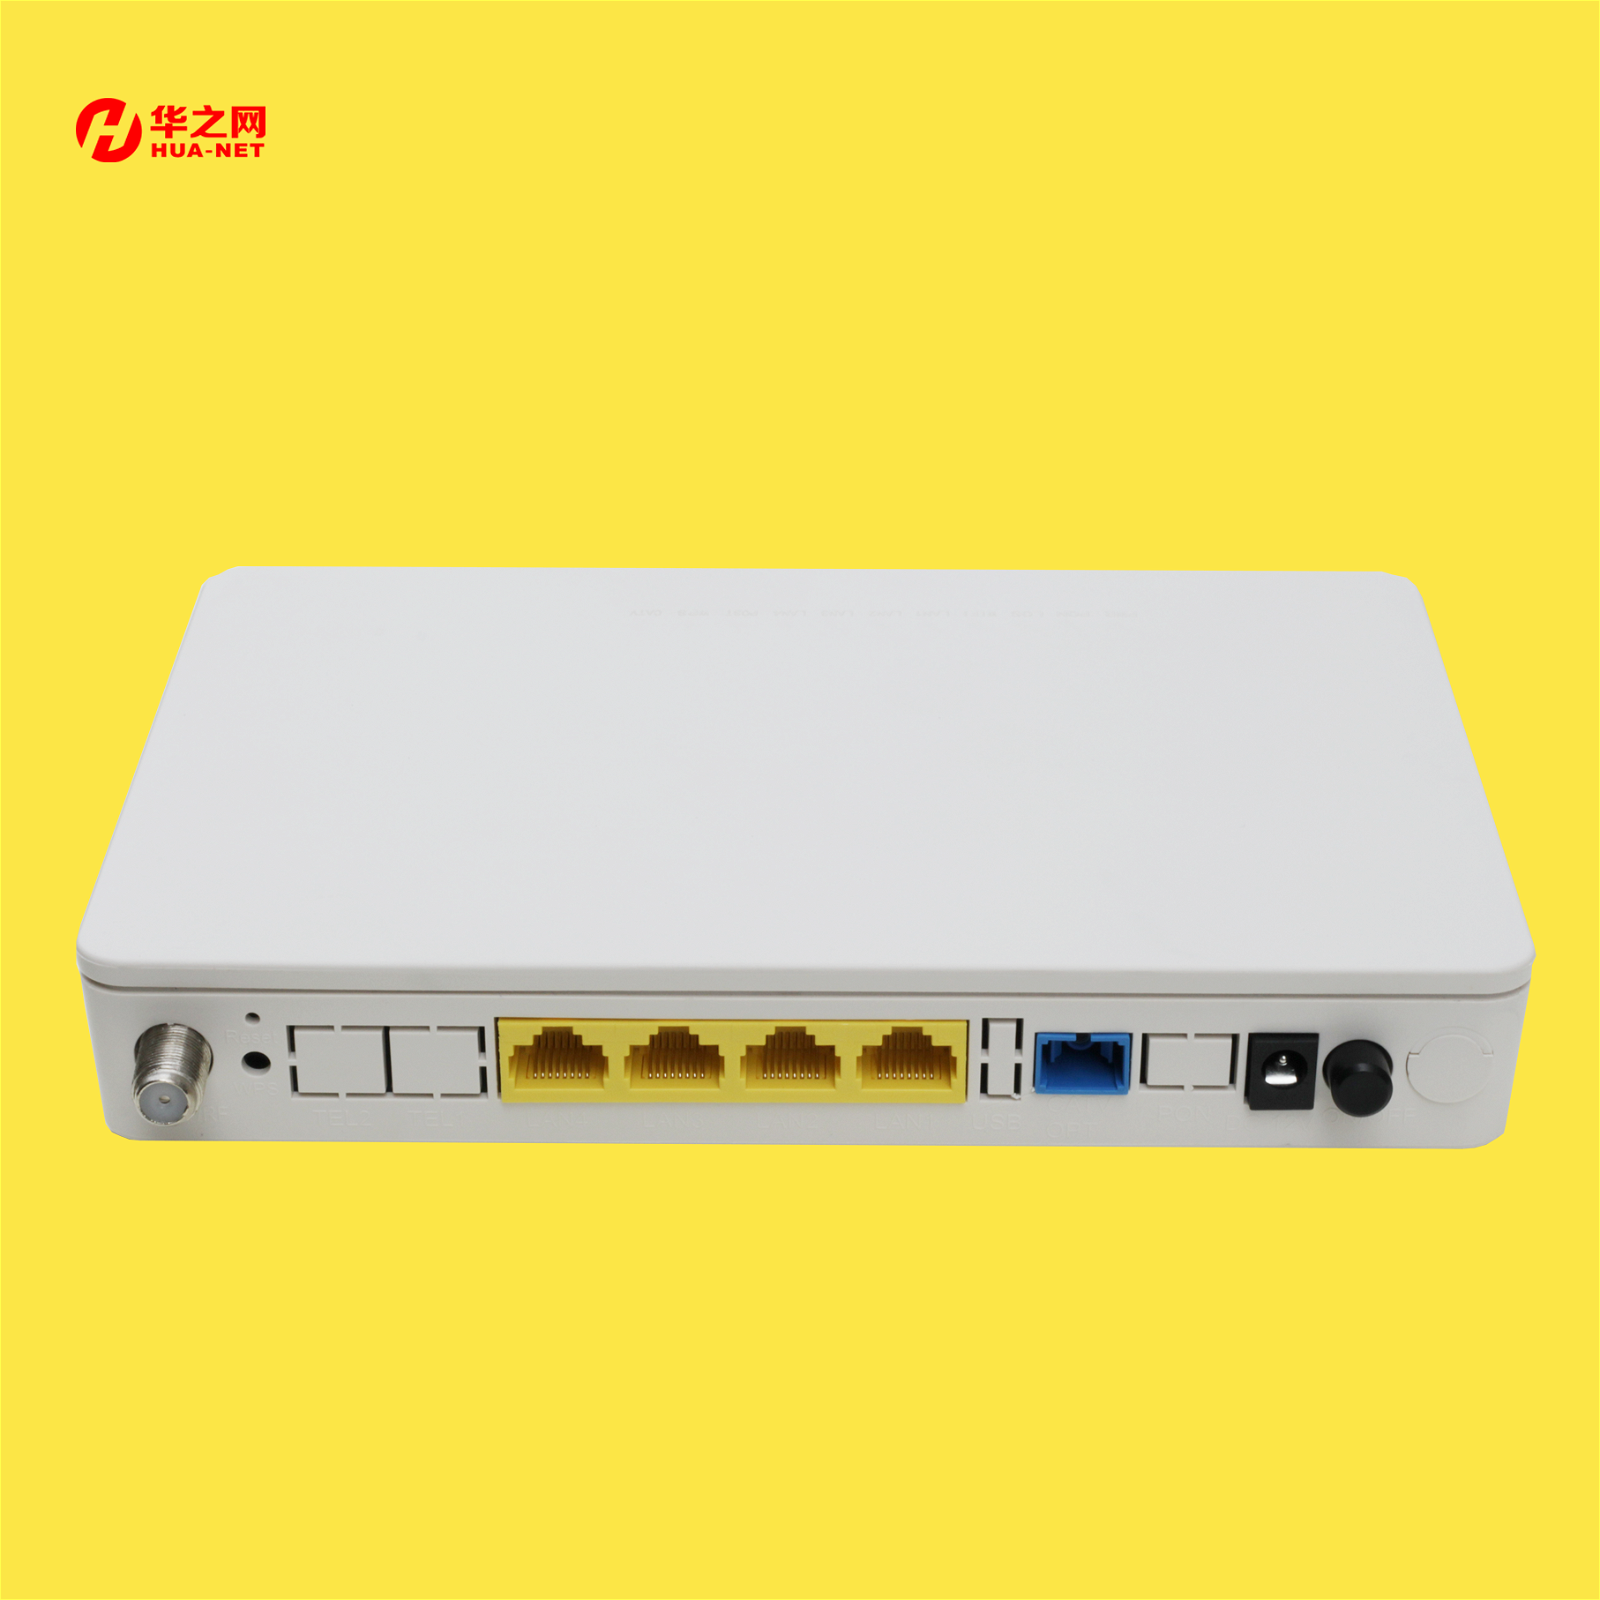 Network CATV Gpon FTTH ONU 4GE/FE+CATV ONU Router for Cable-Television